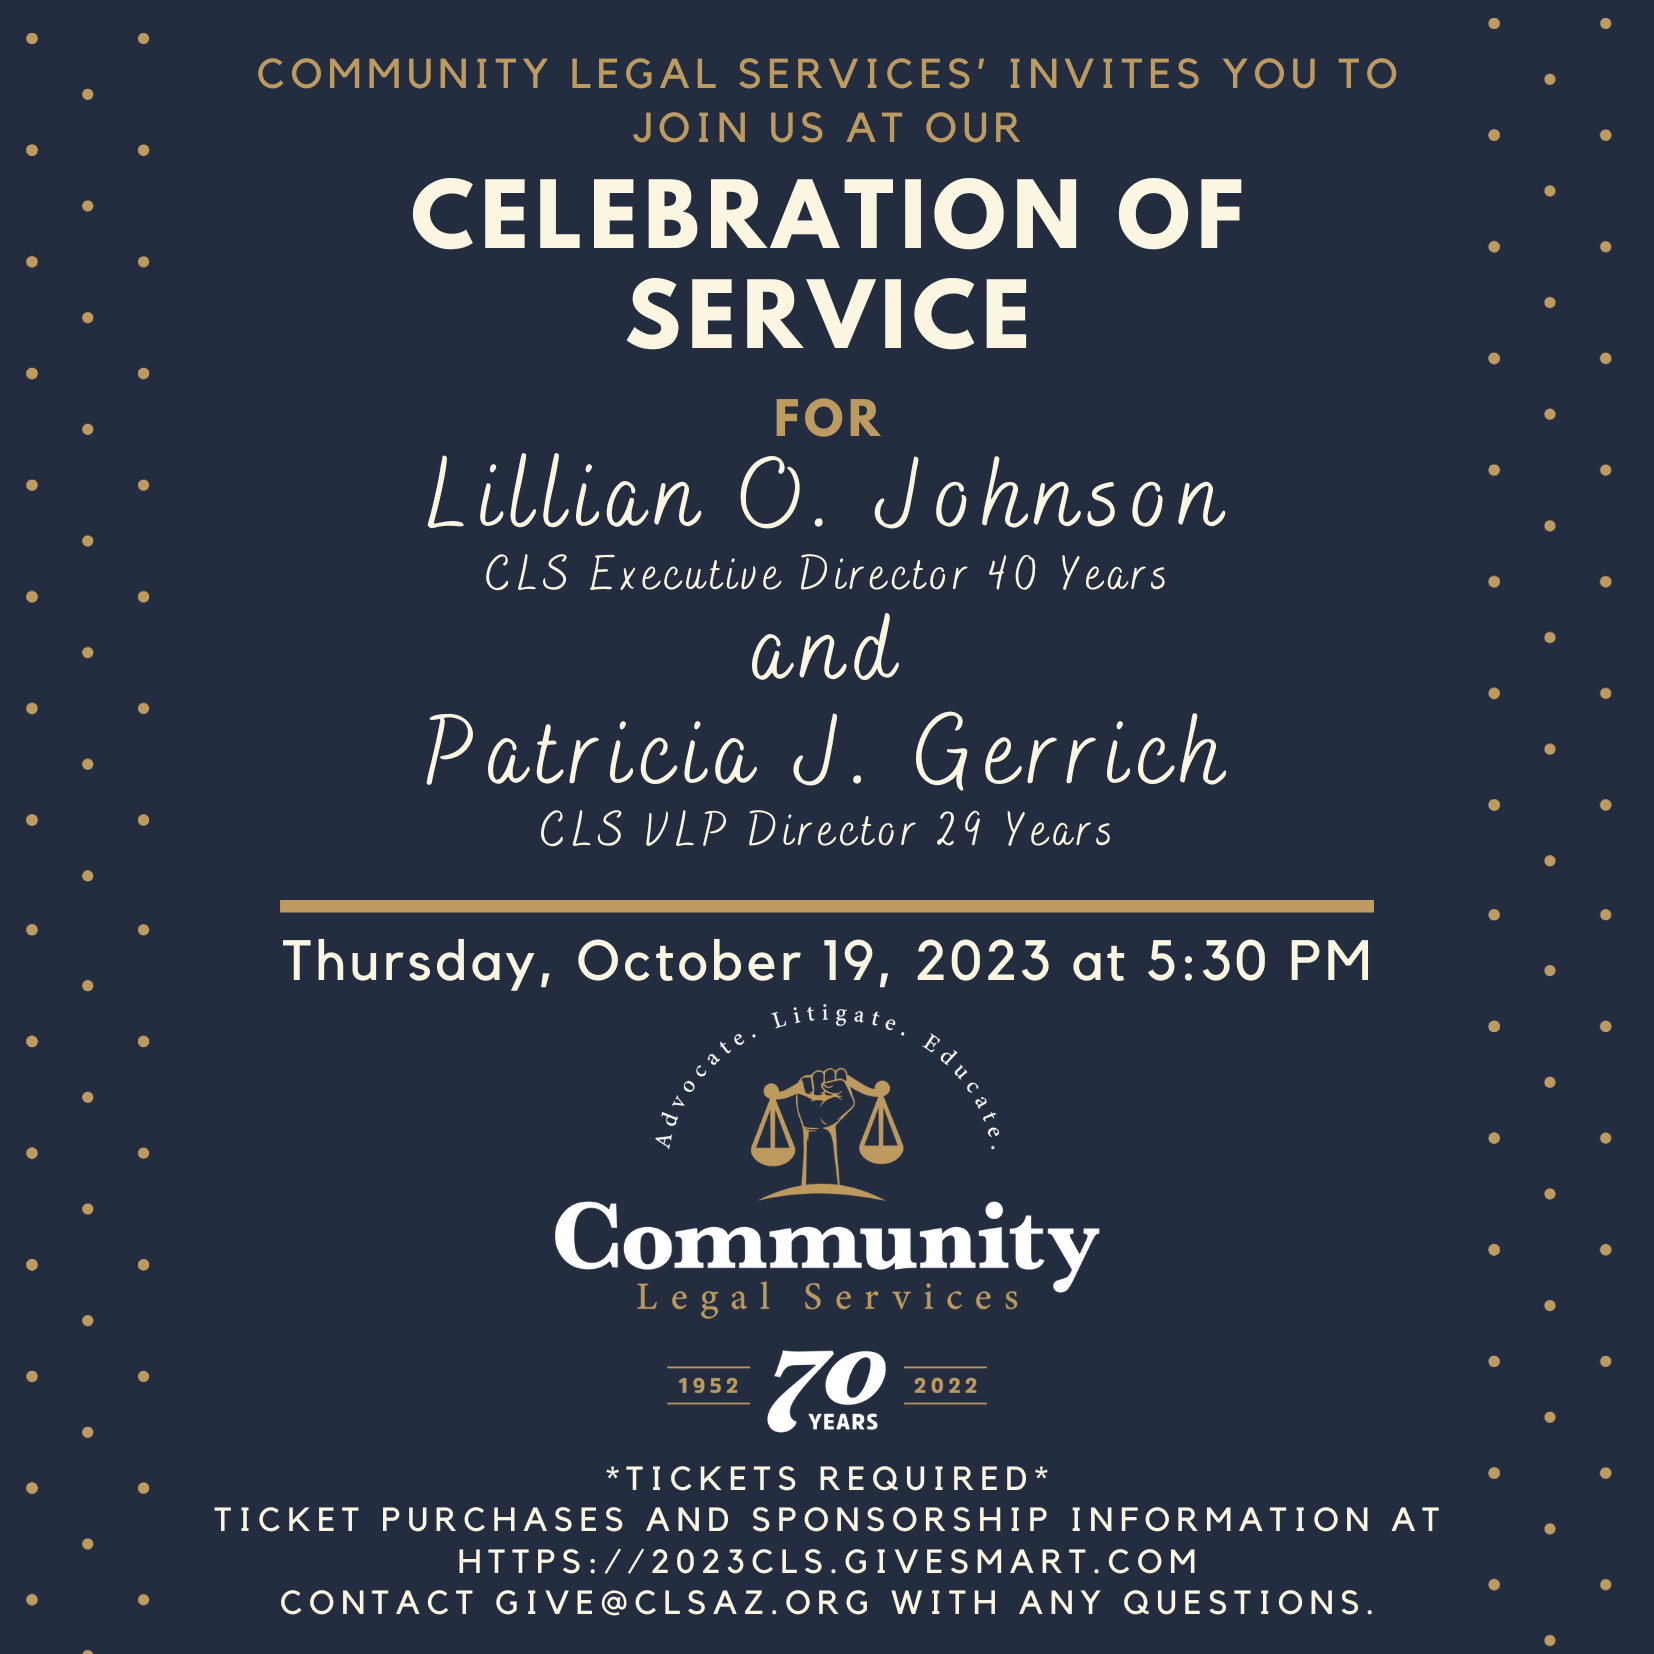 cls-invitation-event-honoring-Lillian-Johnson-and-Pat-Gerrich